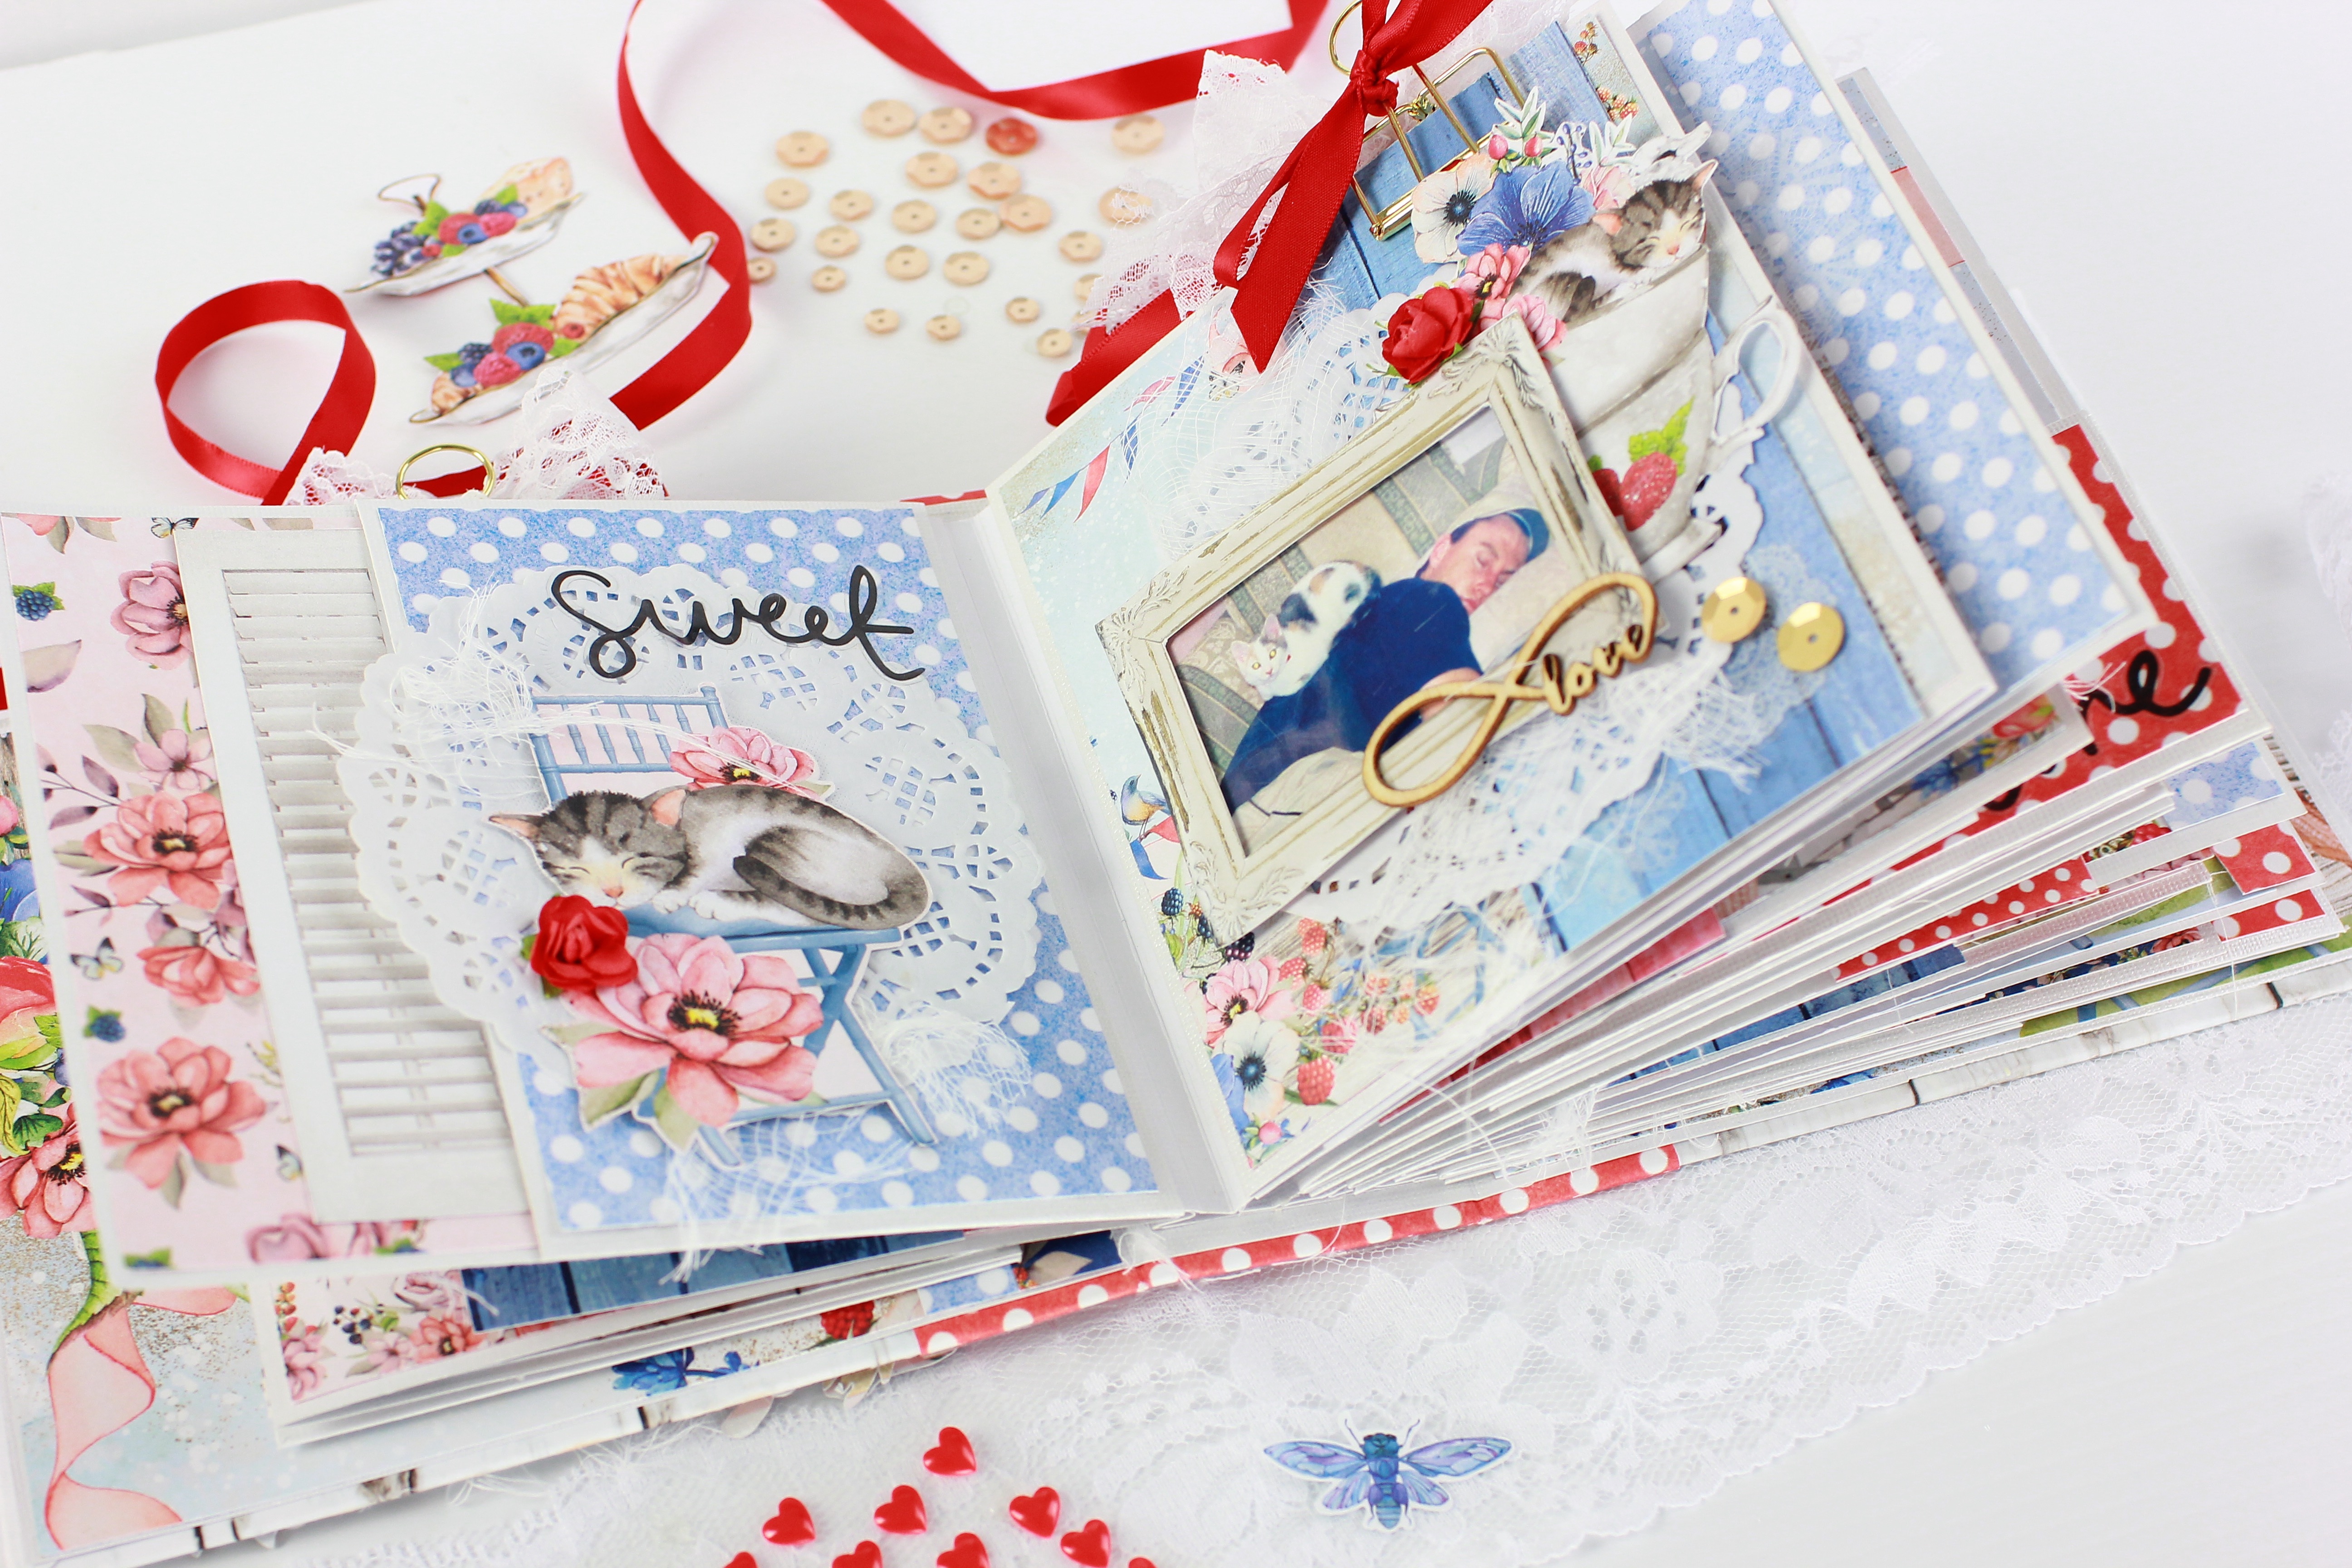 How to make a Mini Album, from scratch. Step-by-step Tutorial Videos and Printable Tutorials are FREE. This album was made using MINTAY Berry Licious Papers and created by Alicia McNamara.